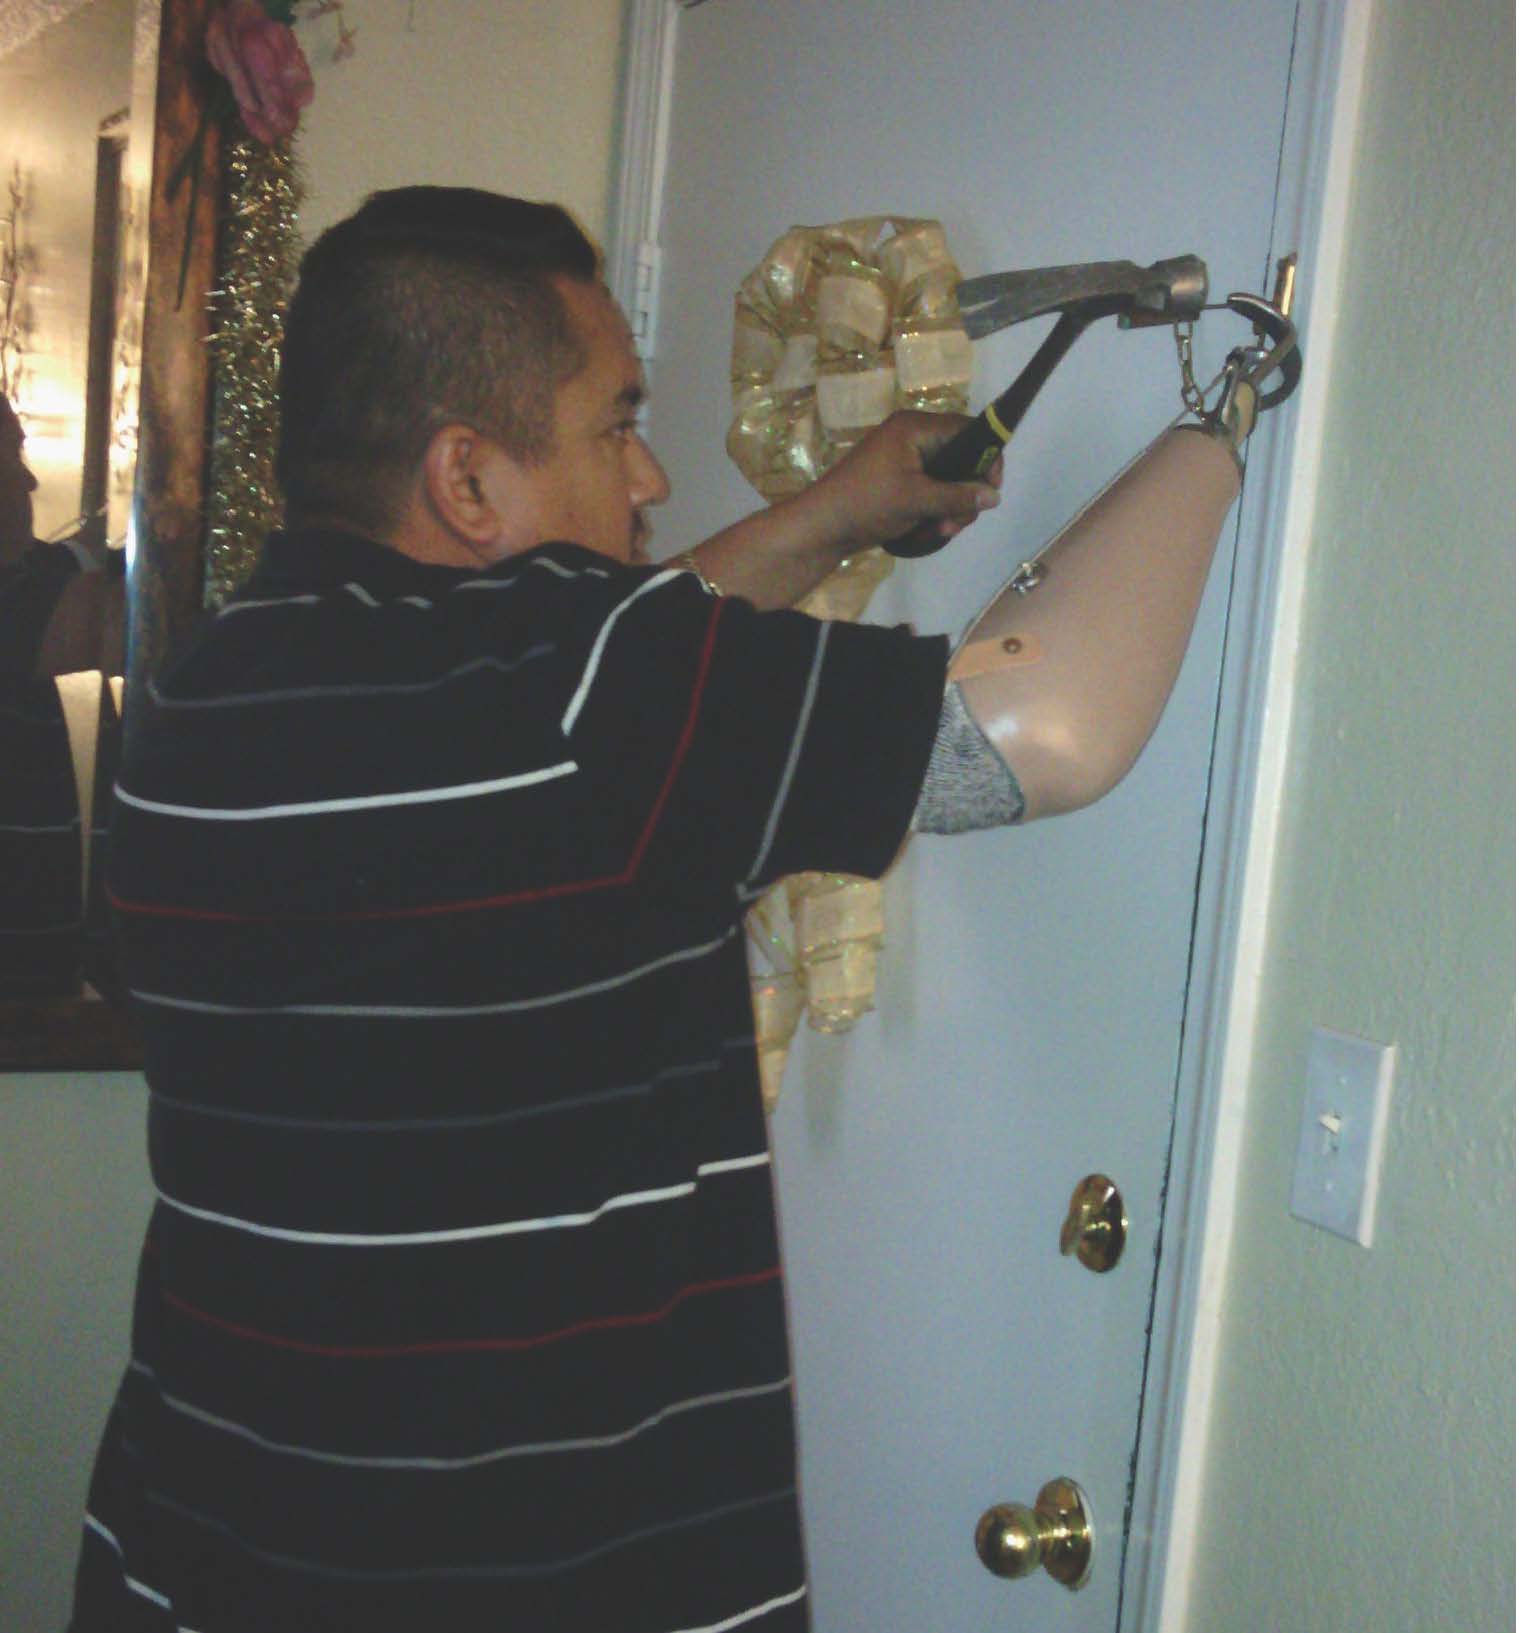 Roslind ( man with arm prosthesis) is fixing a door lock using his hook and an hammer.